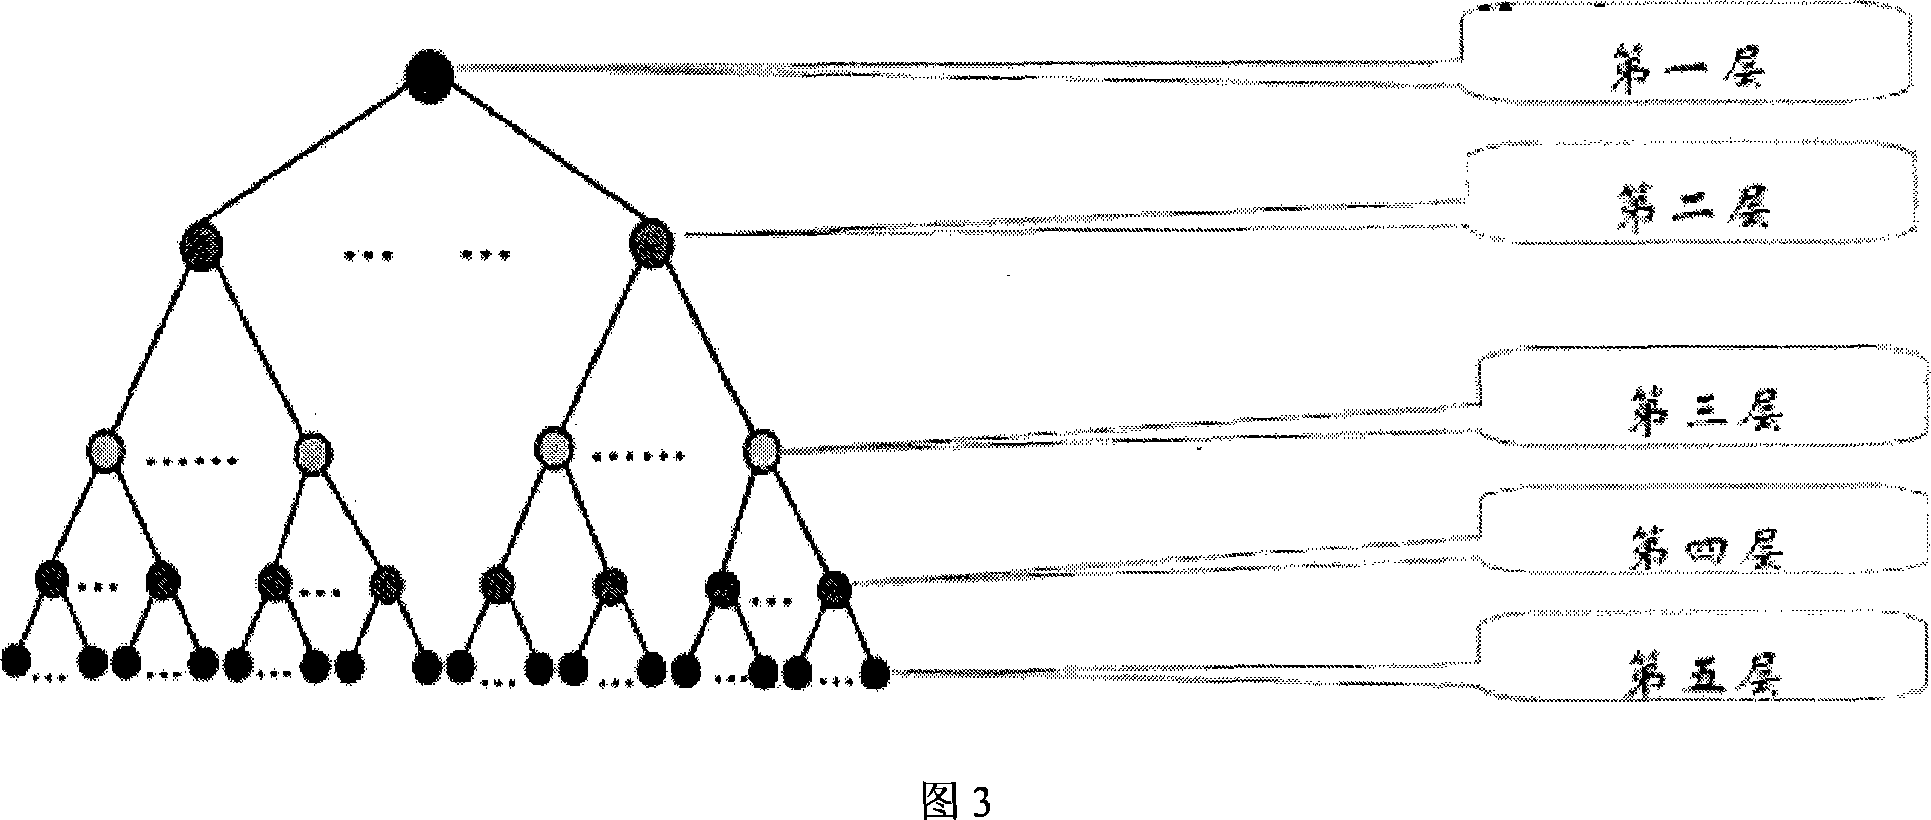 Network flow and delaminated knowledge library based dynamic file clustering method